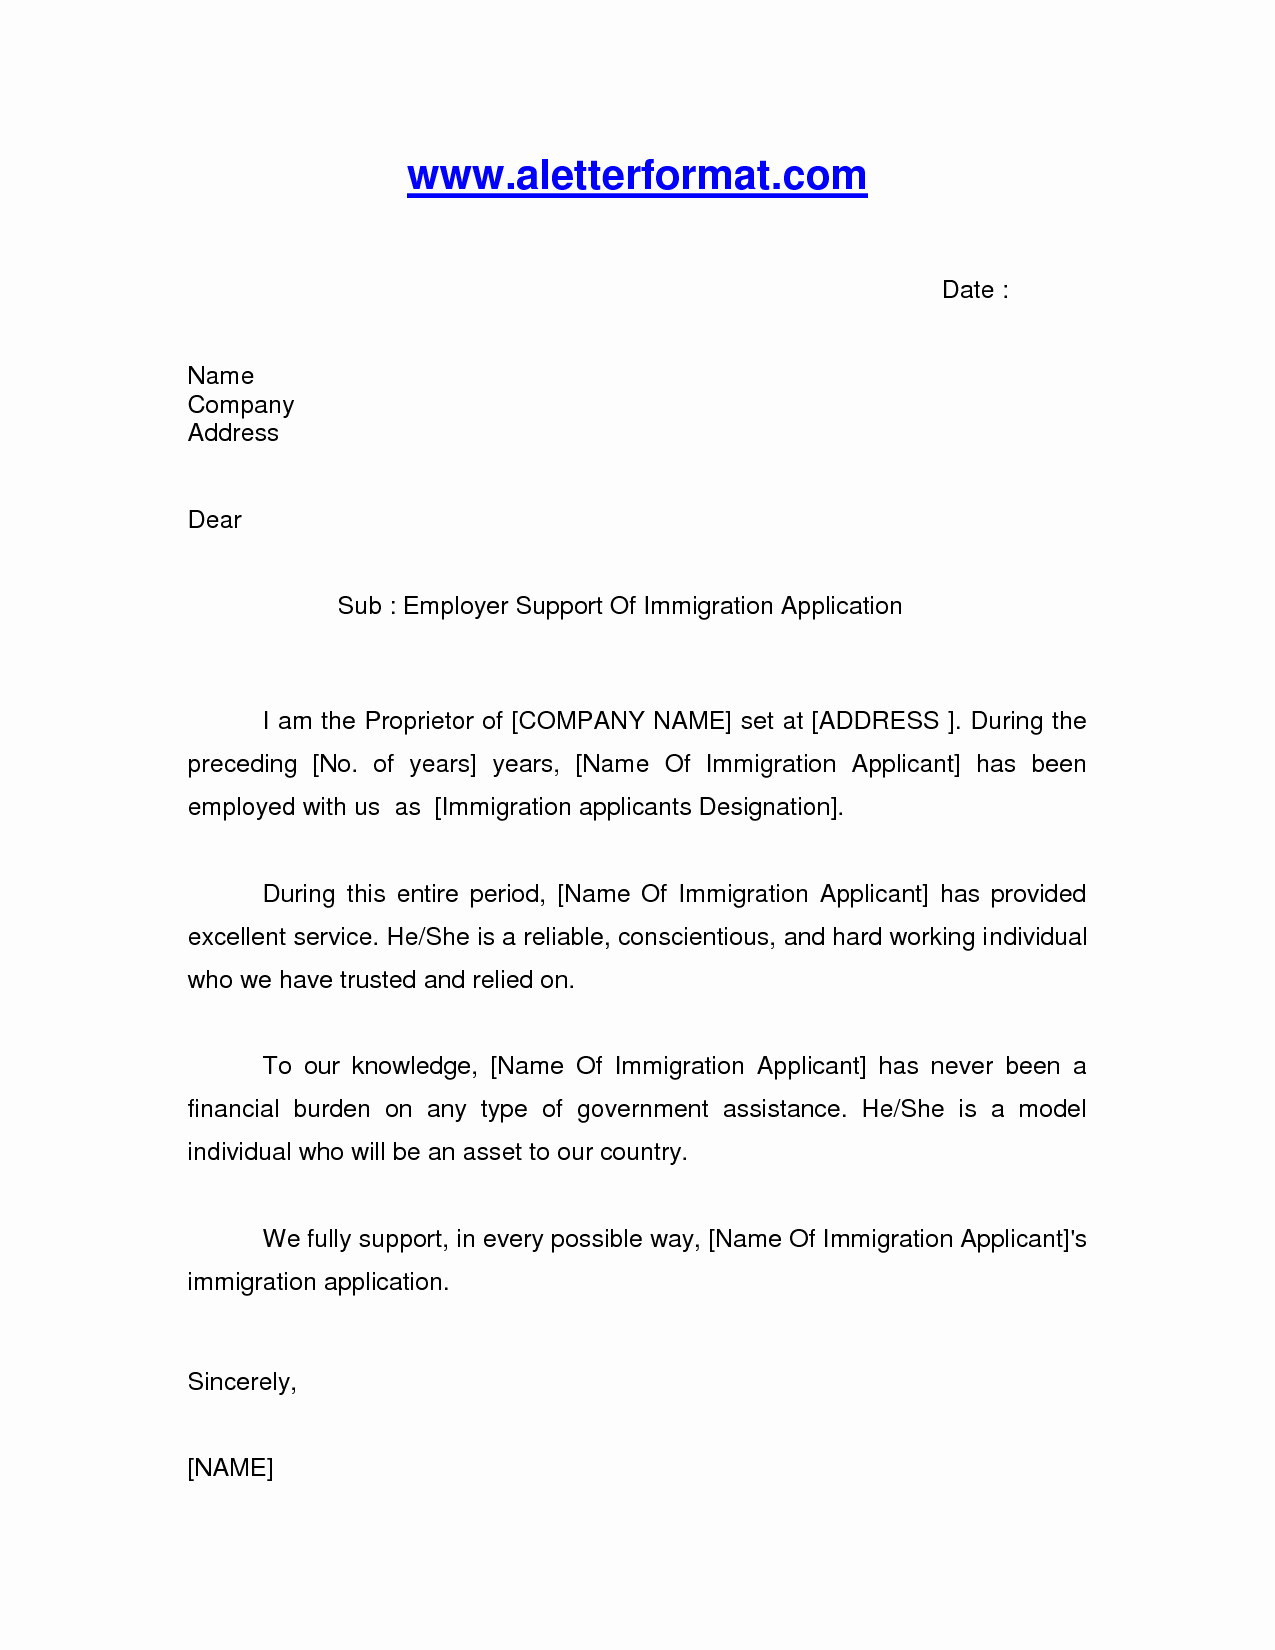 Character Reference Letter for Immigration Fresh Job Letter for Immigration